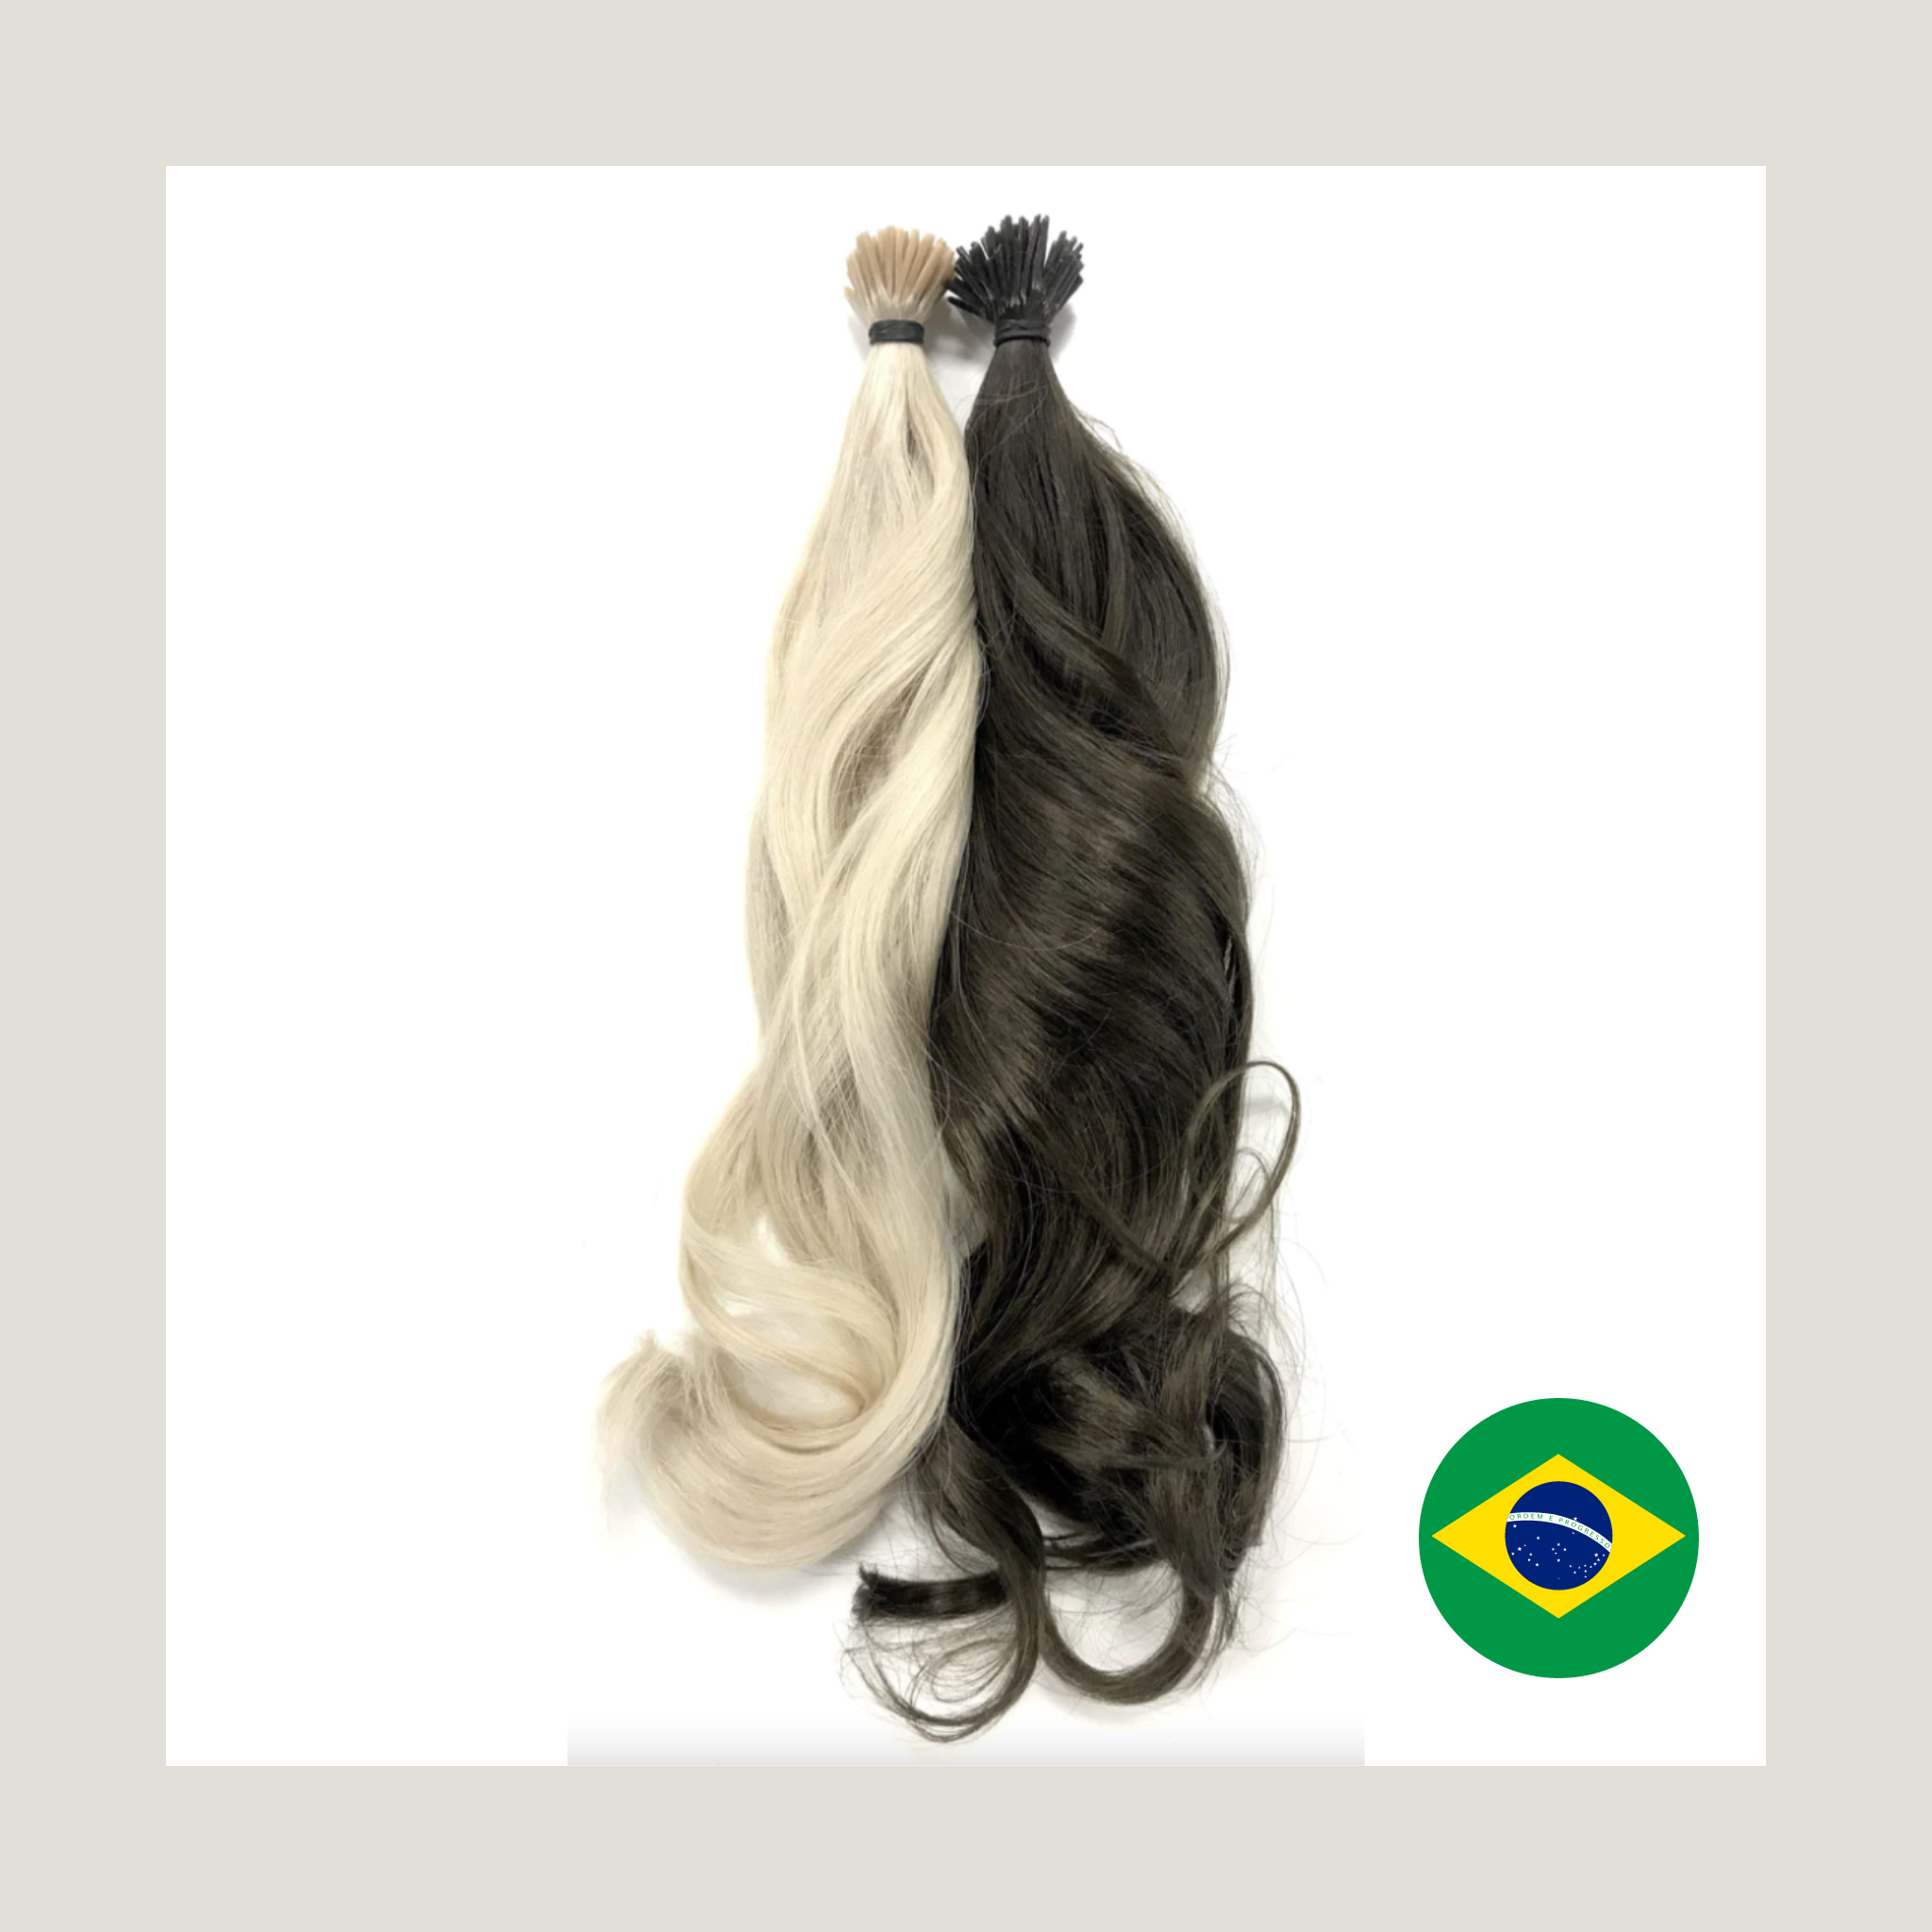 DigiBeauty | Position 130 Hair extension with micro rings - Price 325 EUR